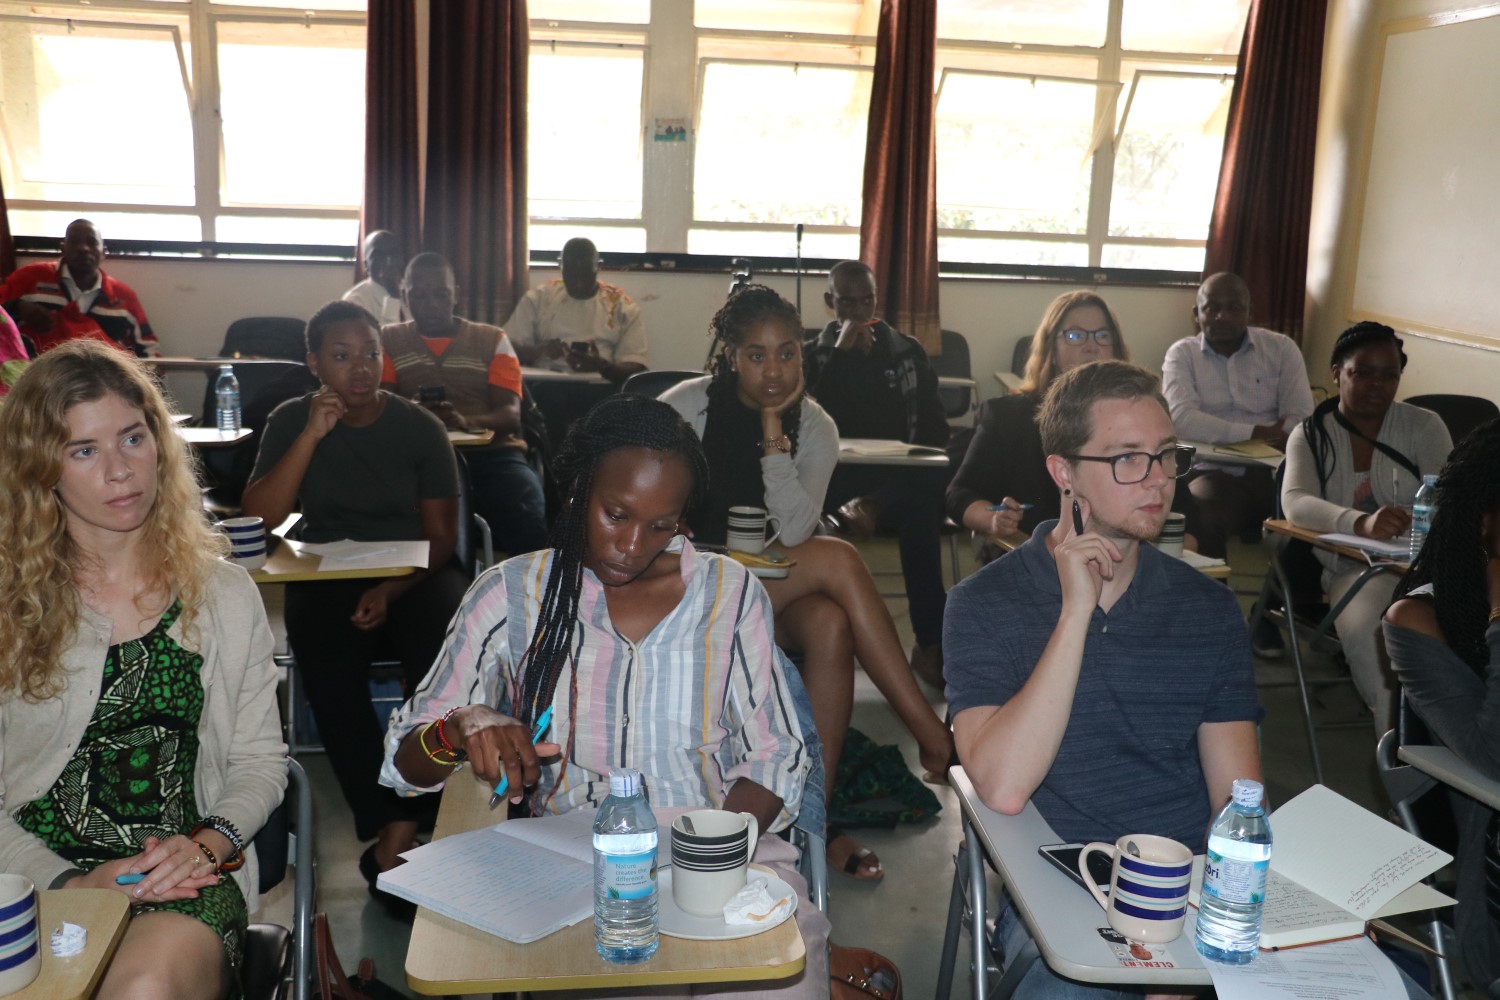 Participants at the symposium listening attentively to the presentations. Participants included students from Makerere University School of Public Health, Georgia State University in the US, Ministry of Health and academicians.